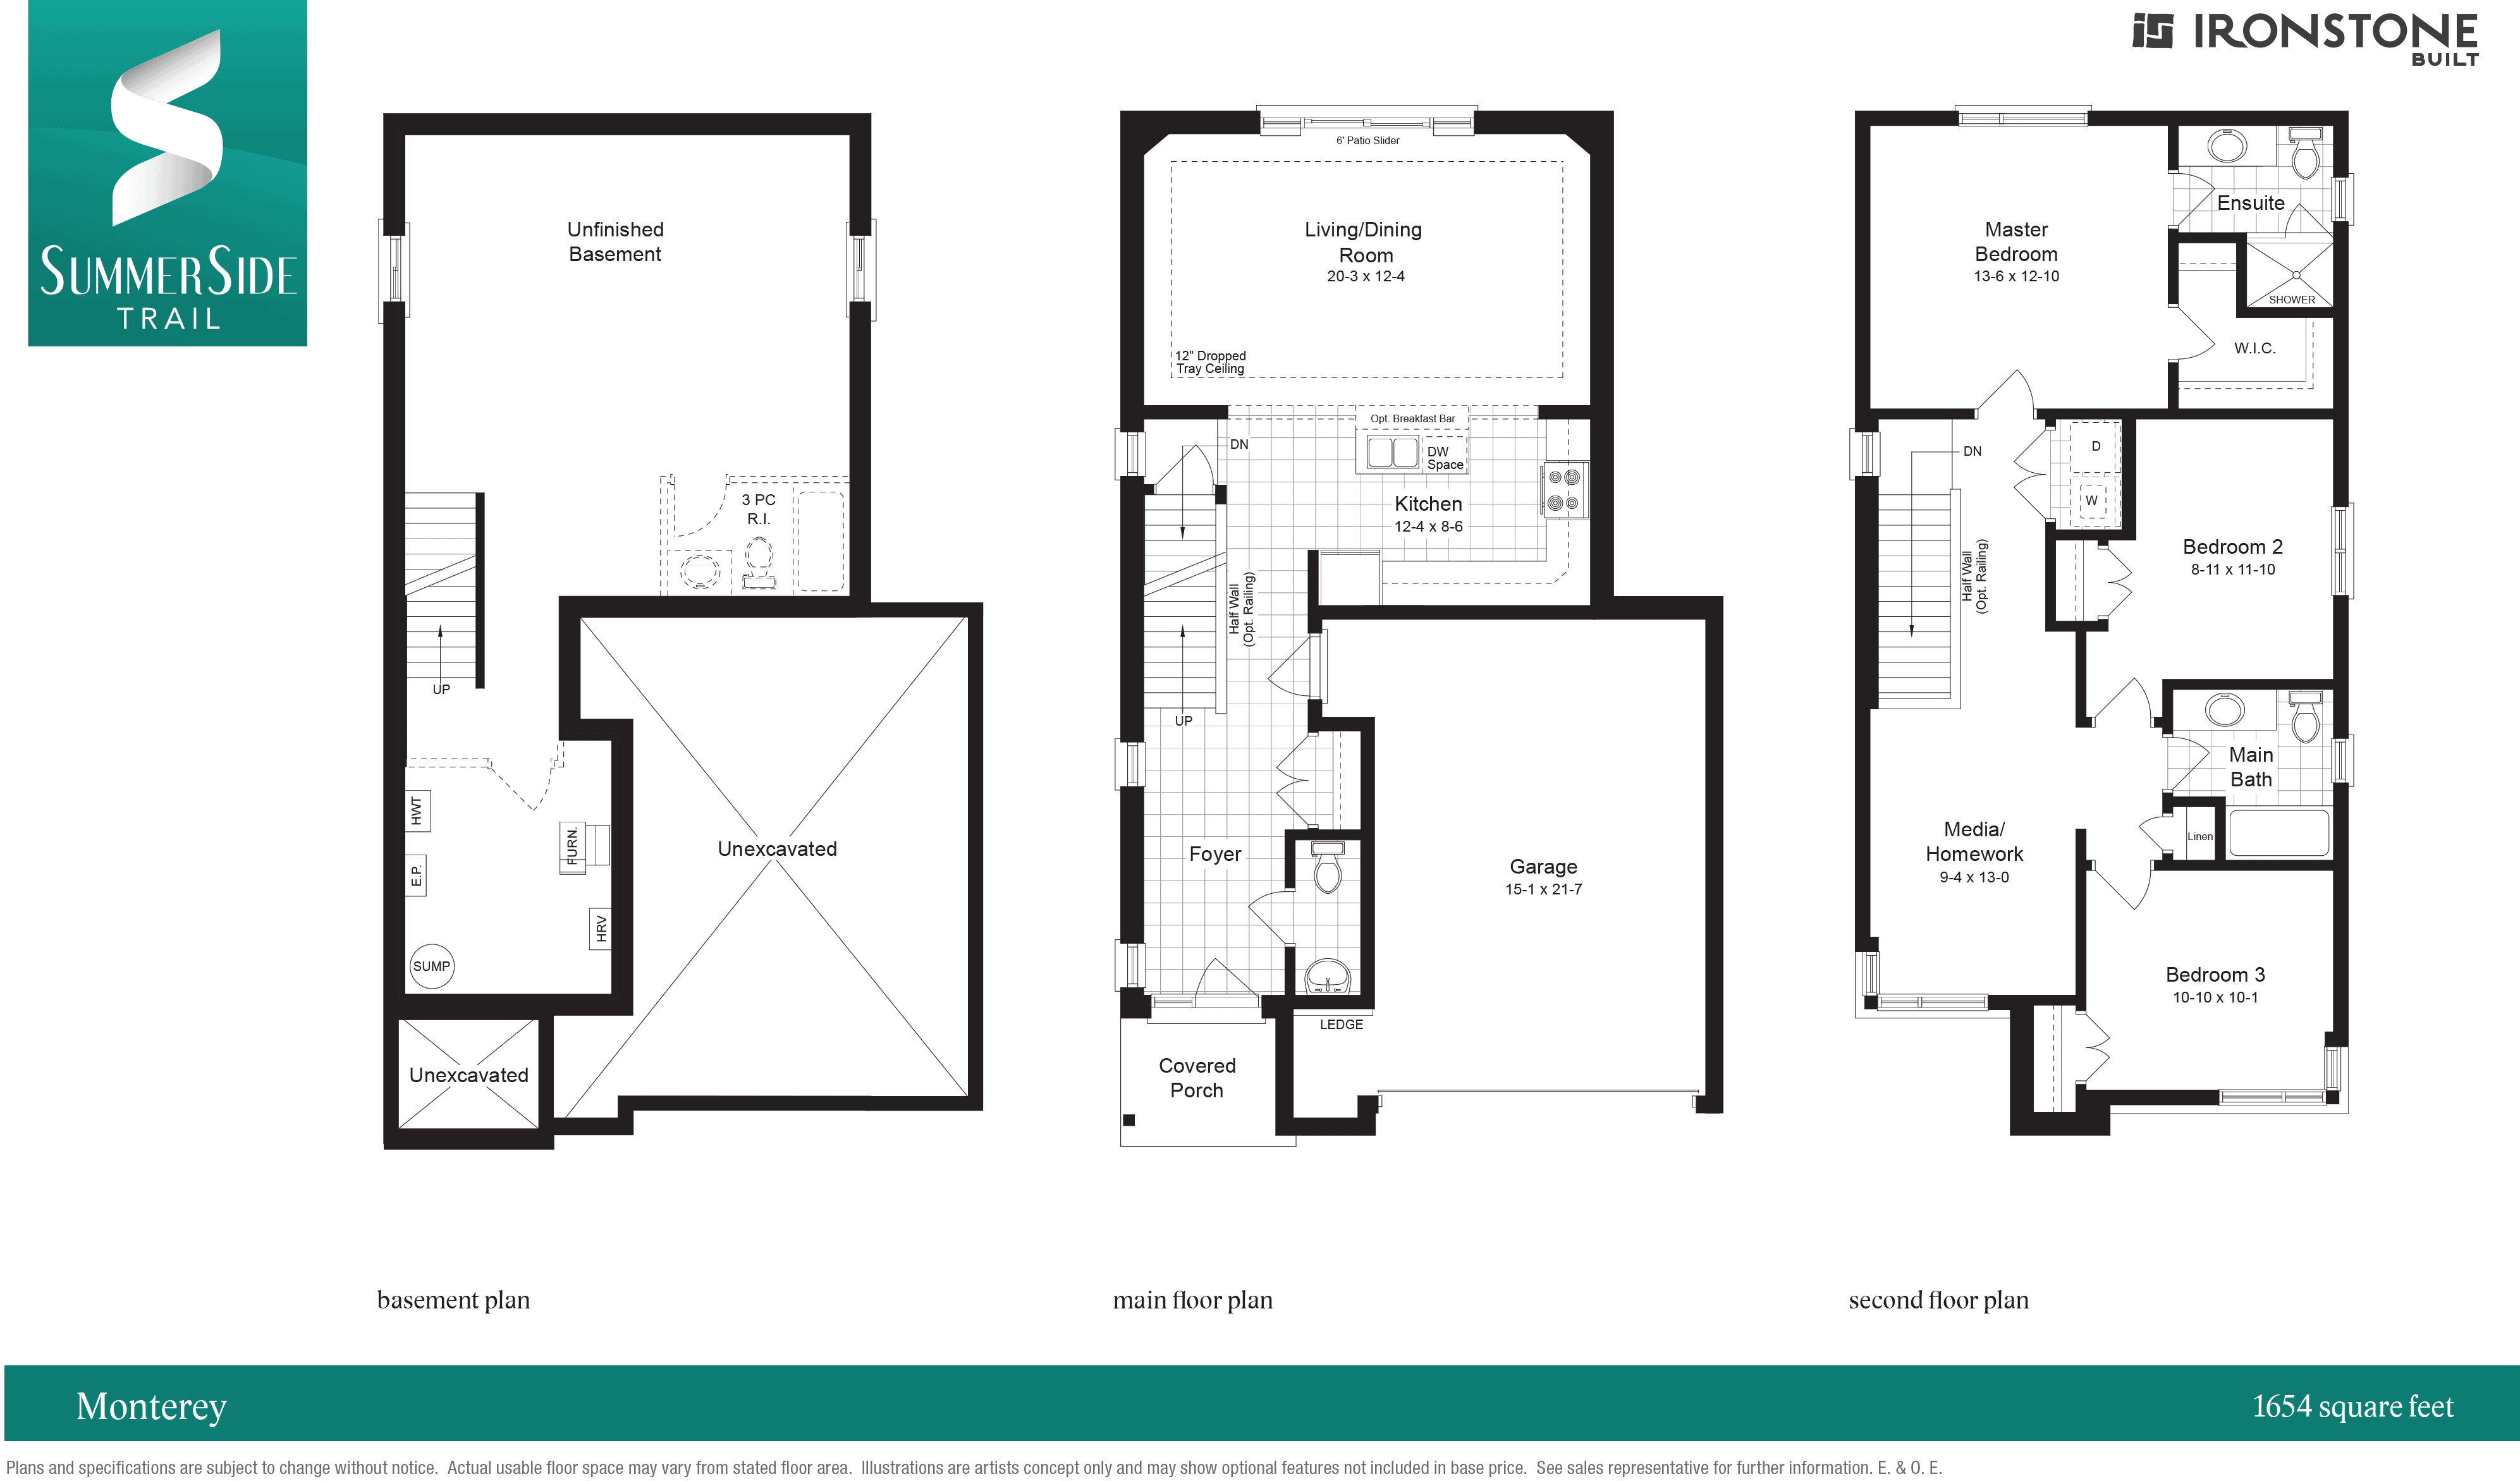  2044 Evans Blvd  Floor Plan of Summerside Trail with undefined beds